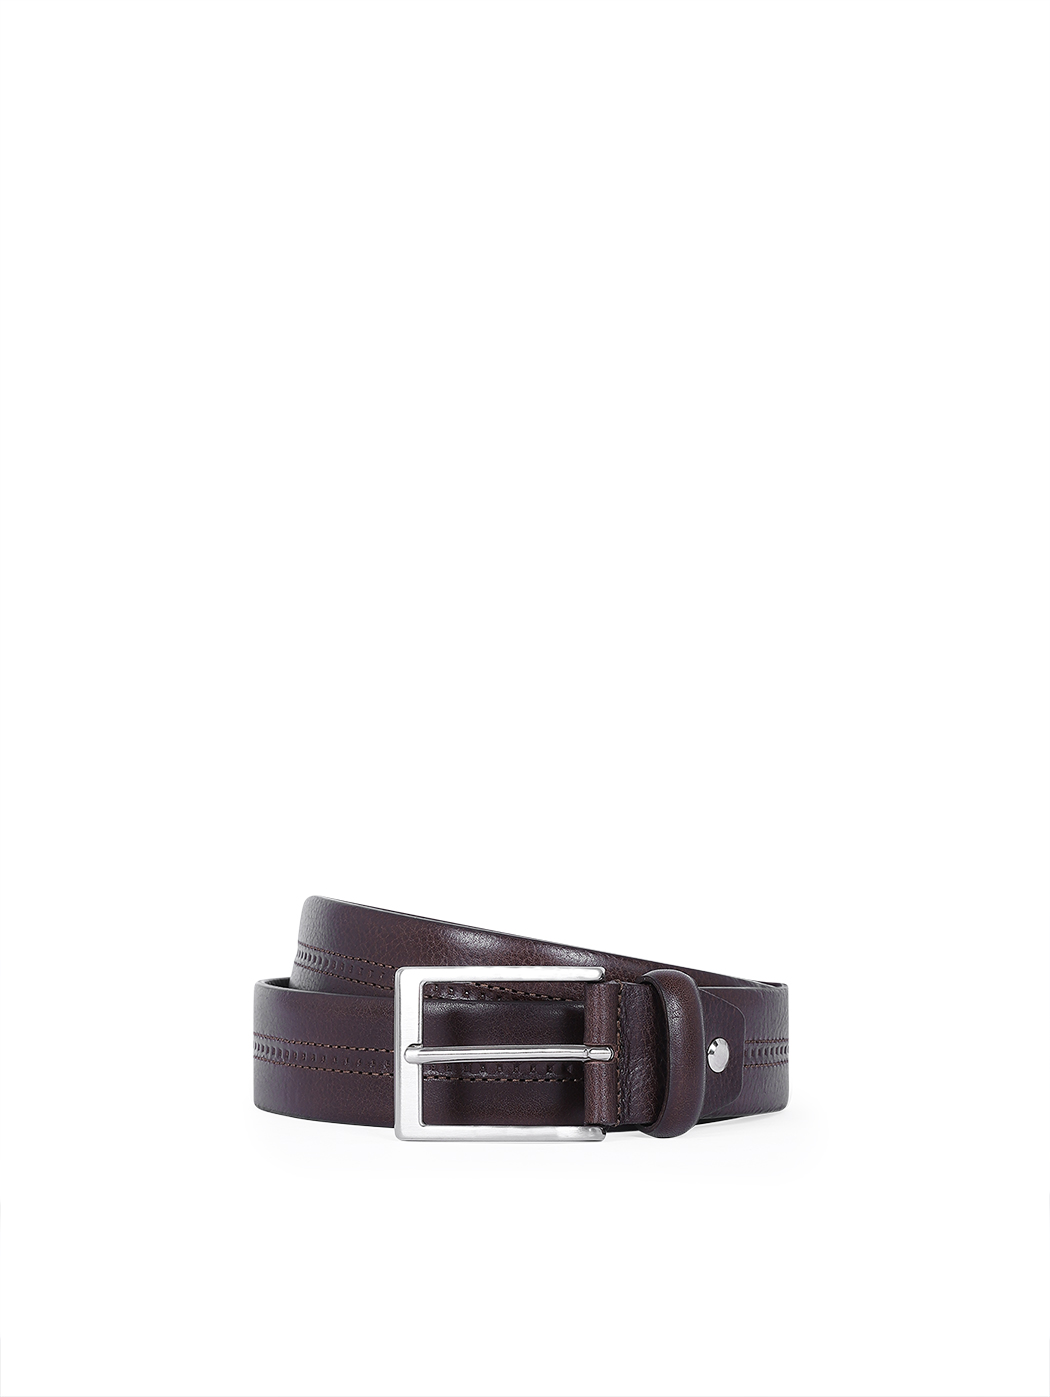 Classic Italian Belt For Man With Stitching Dark brown